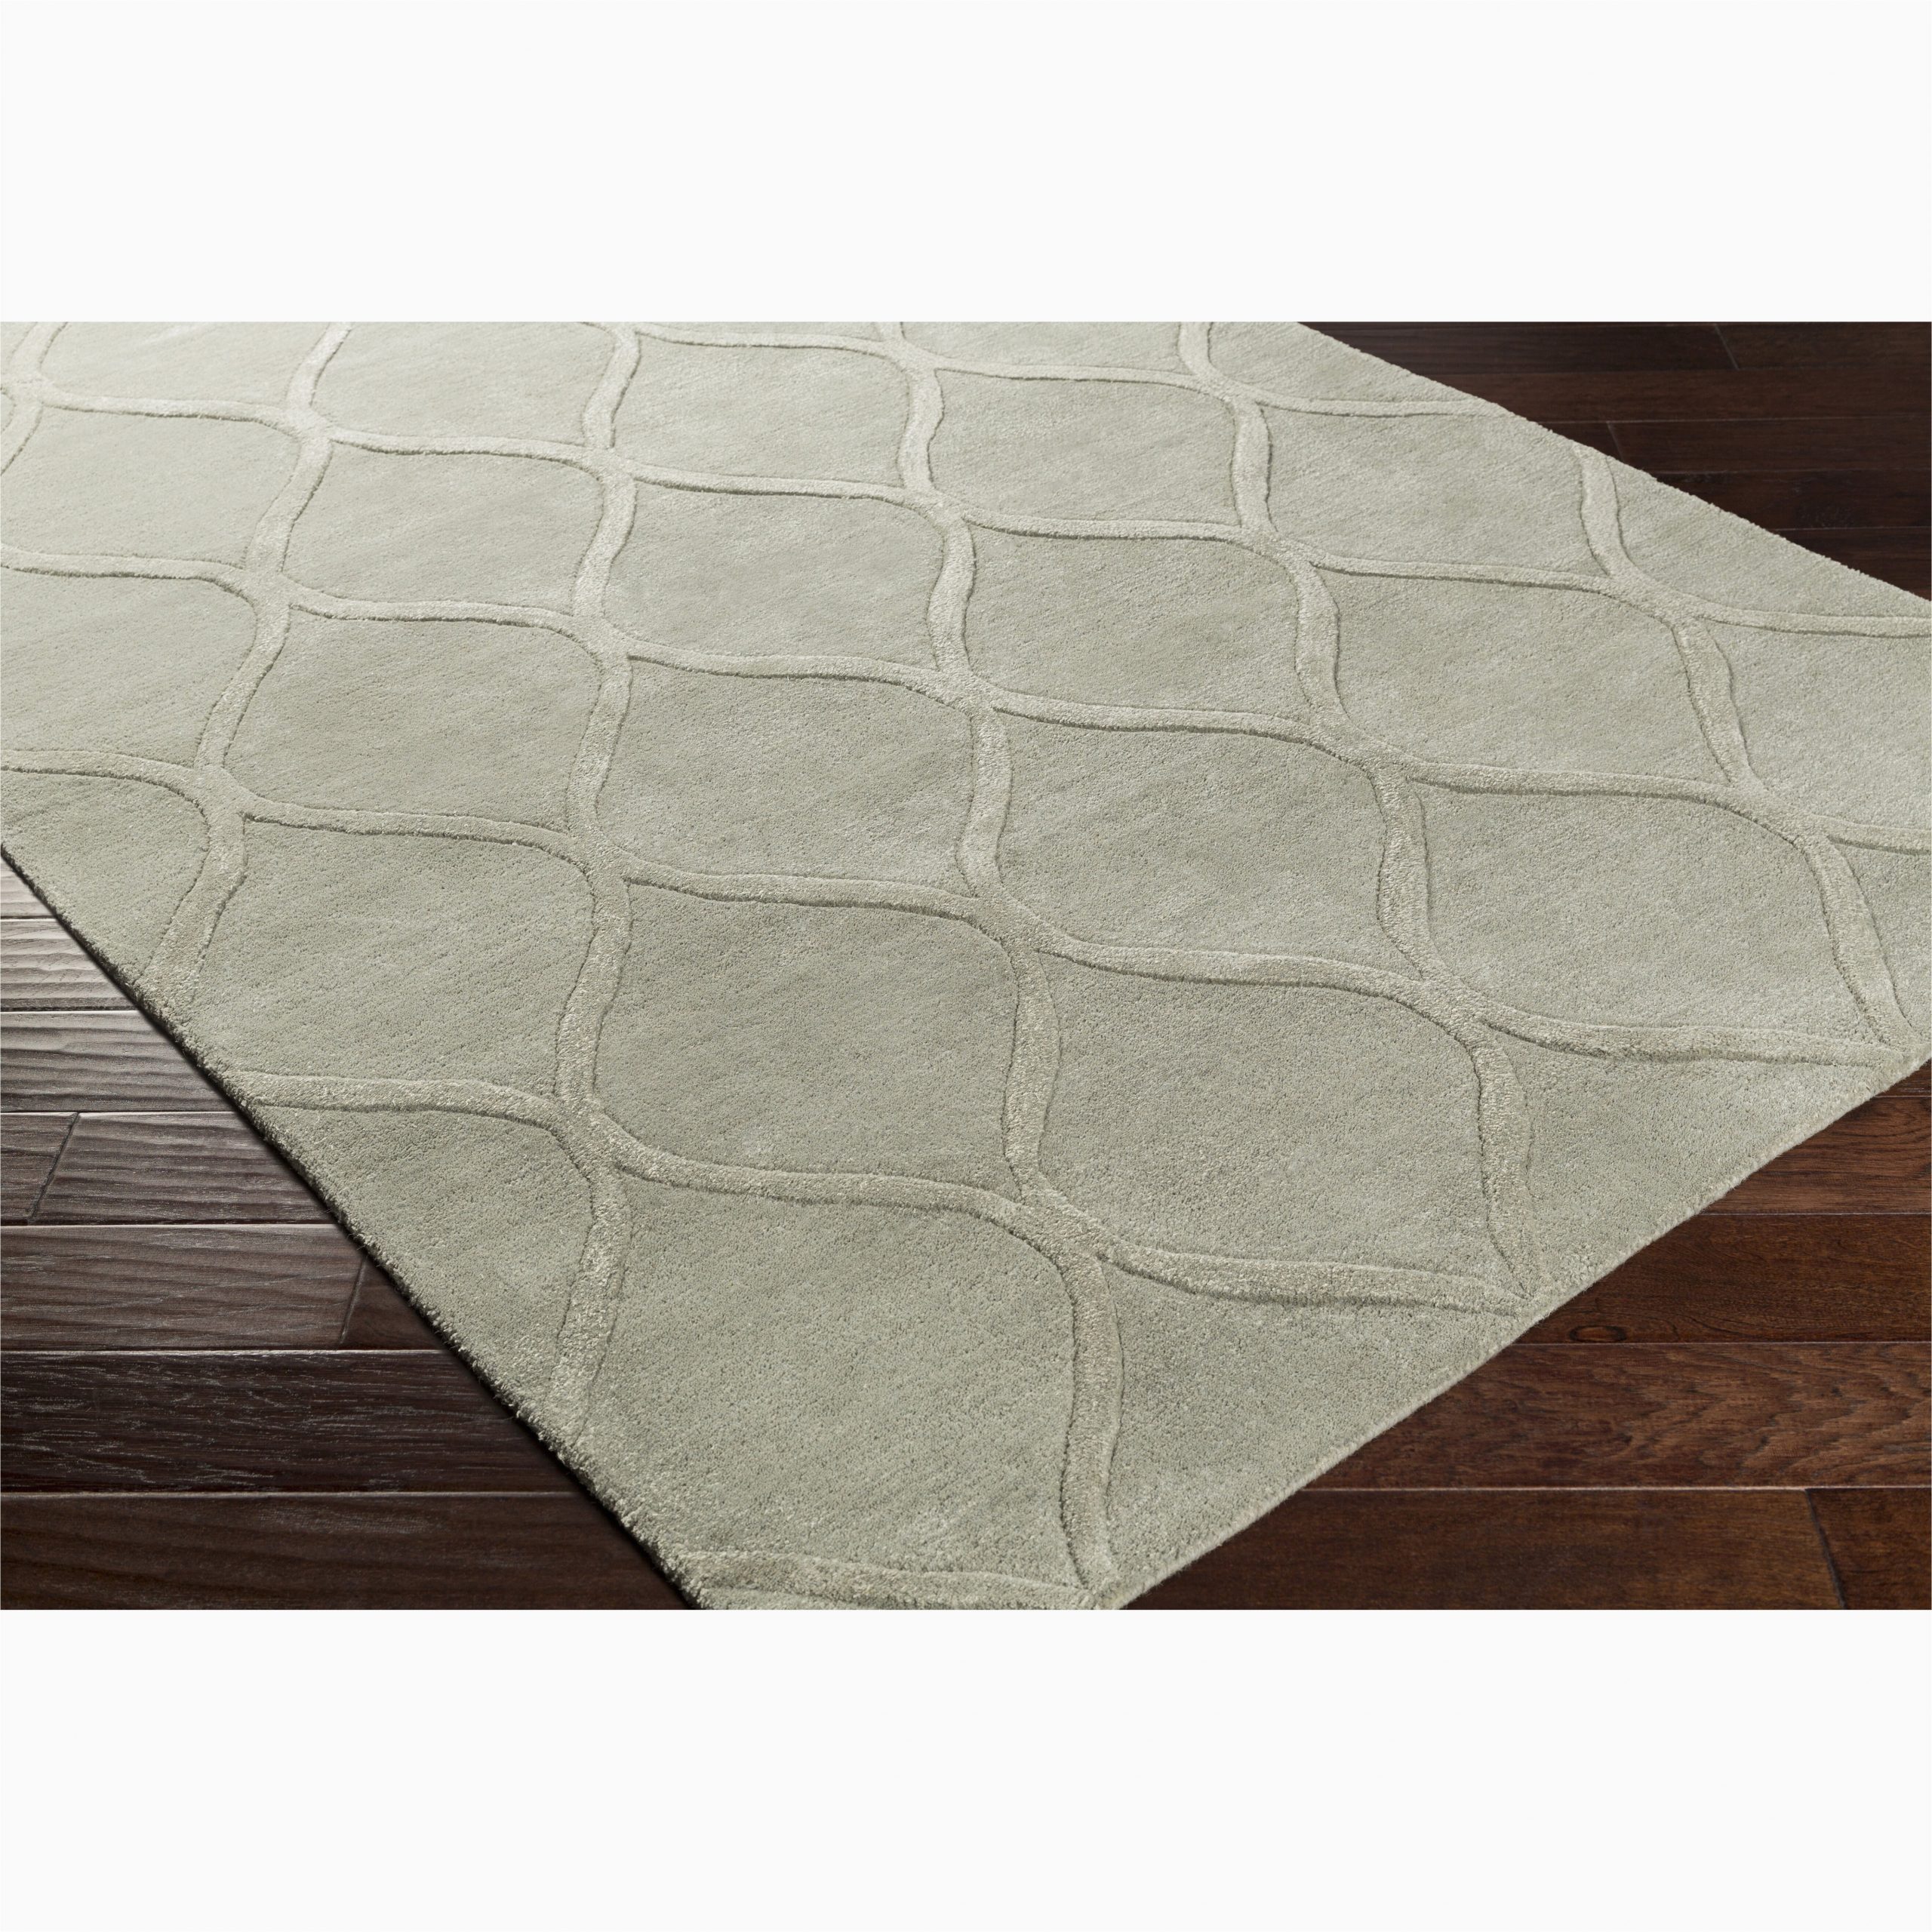 Cassidy Hand Tufted area Rug Artistic Weavers Urban Cassidy Hand Tufted Seafoam Green